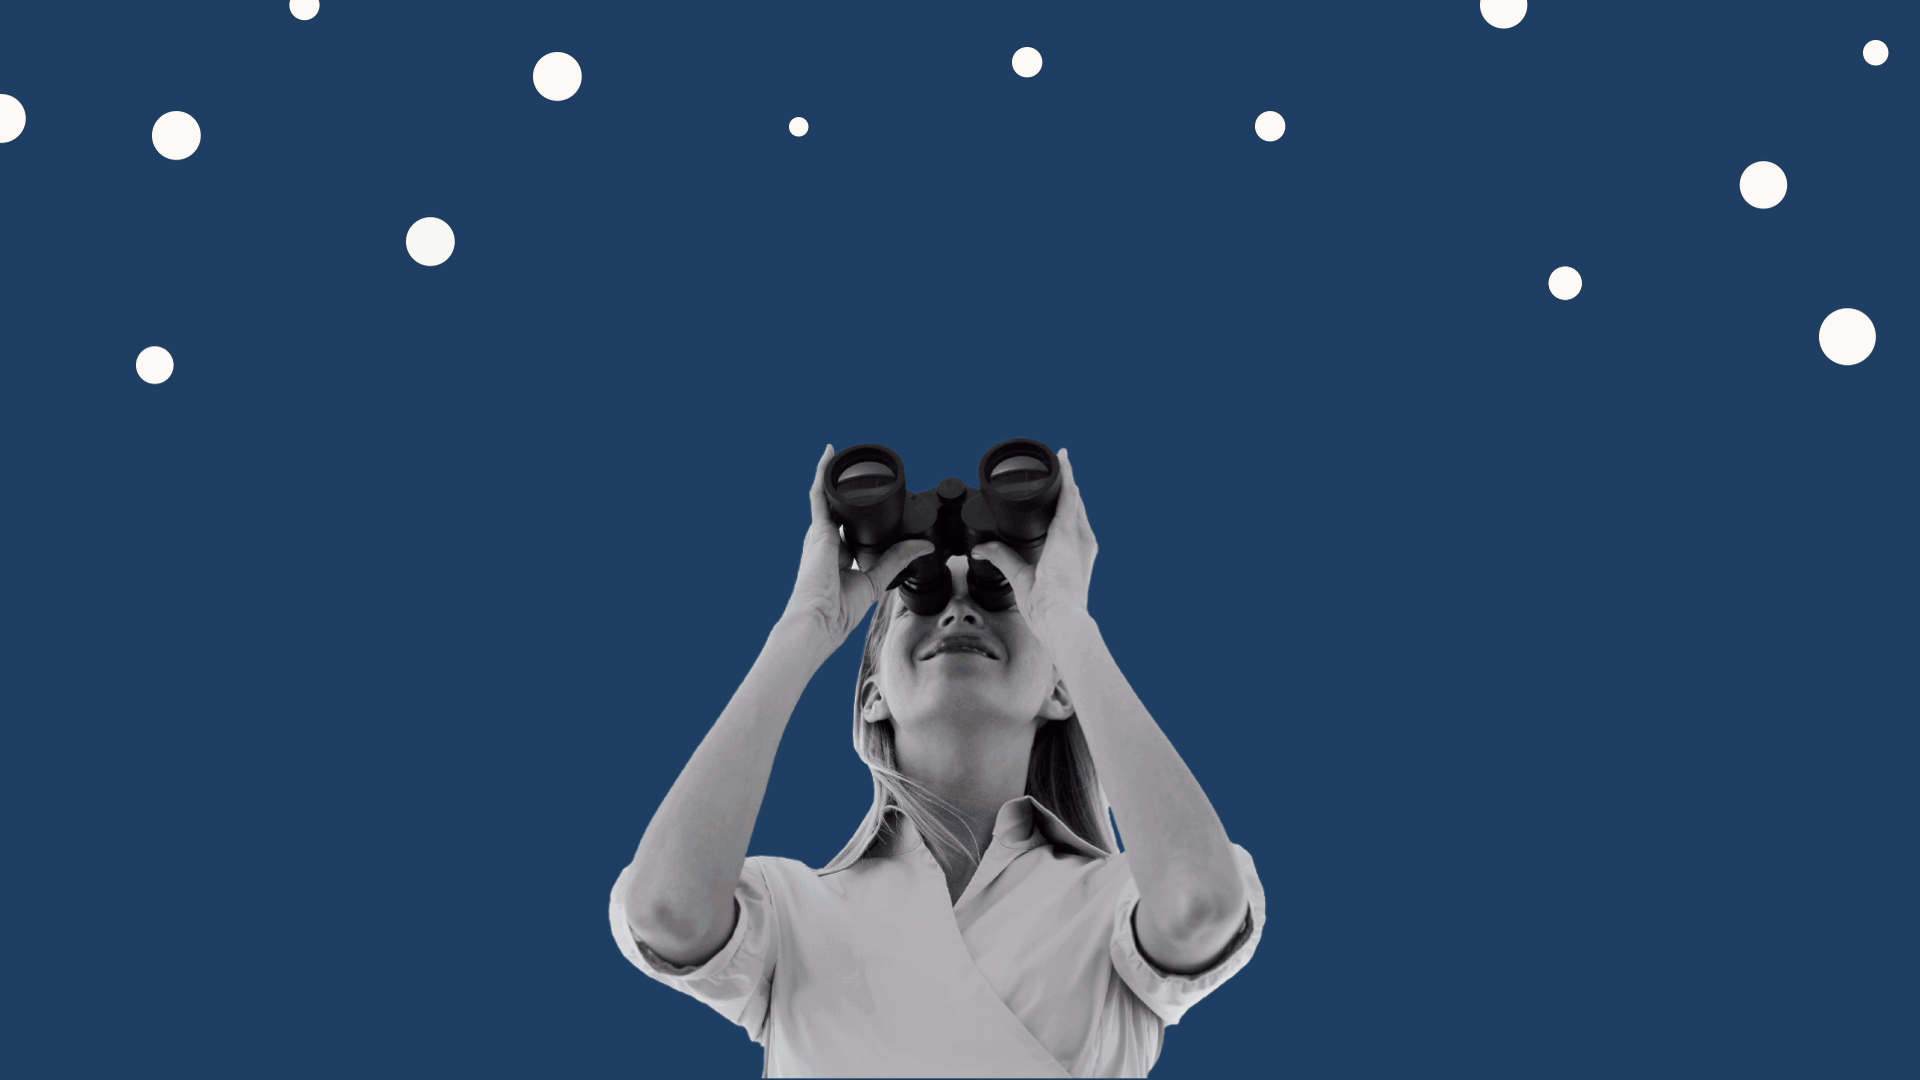 Illustration of woman holding binoculars looking at the sky, with interactive data elements growing in the background